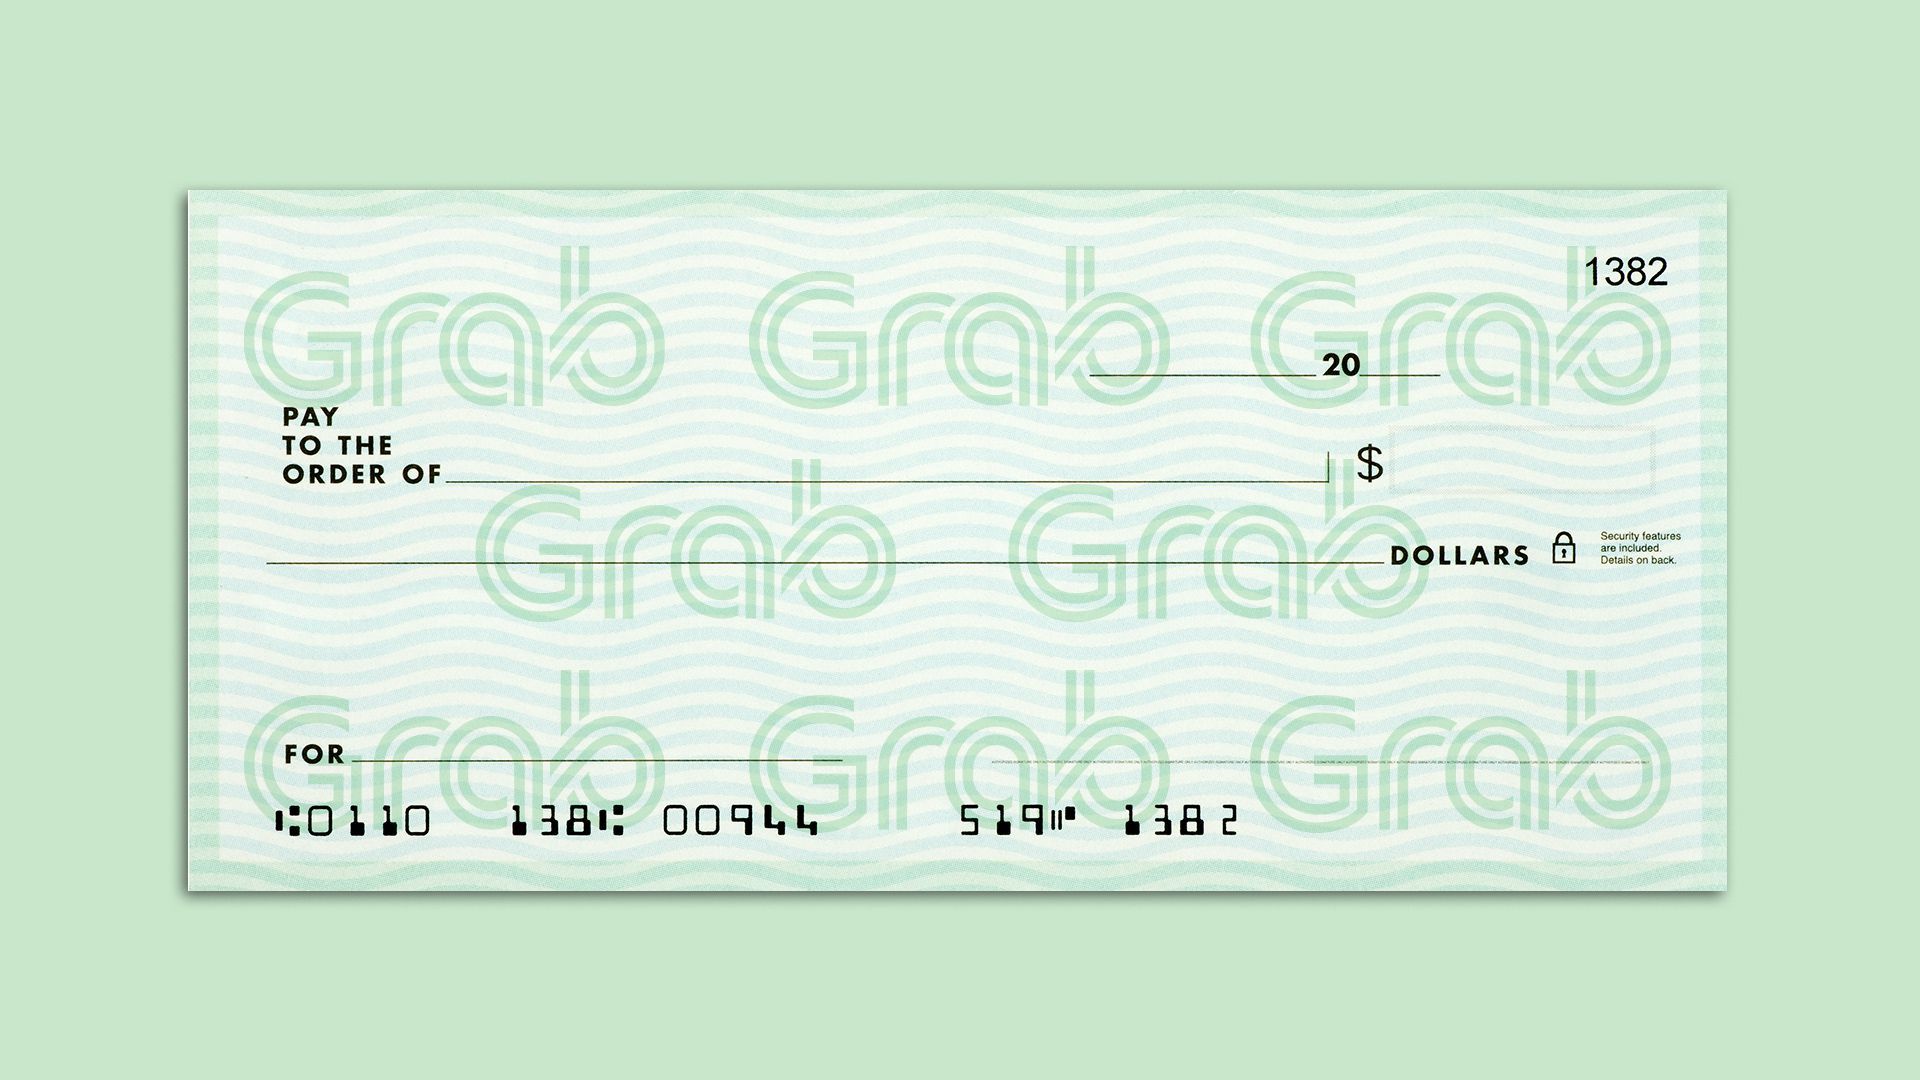 Illustration of a Grab logo patterned watermark on a blank check.  